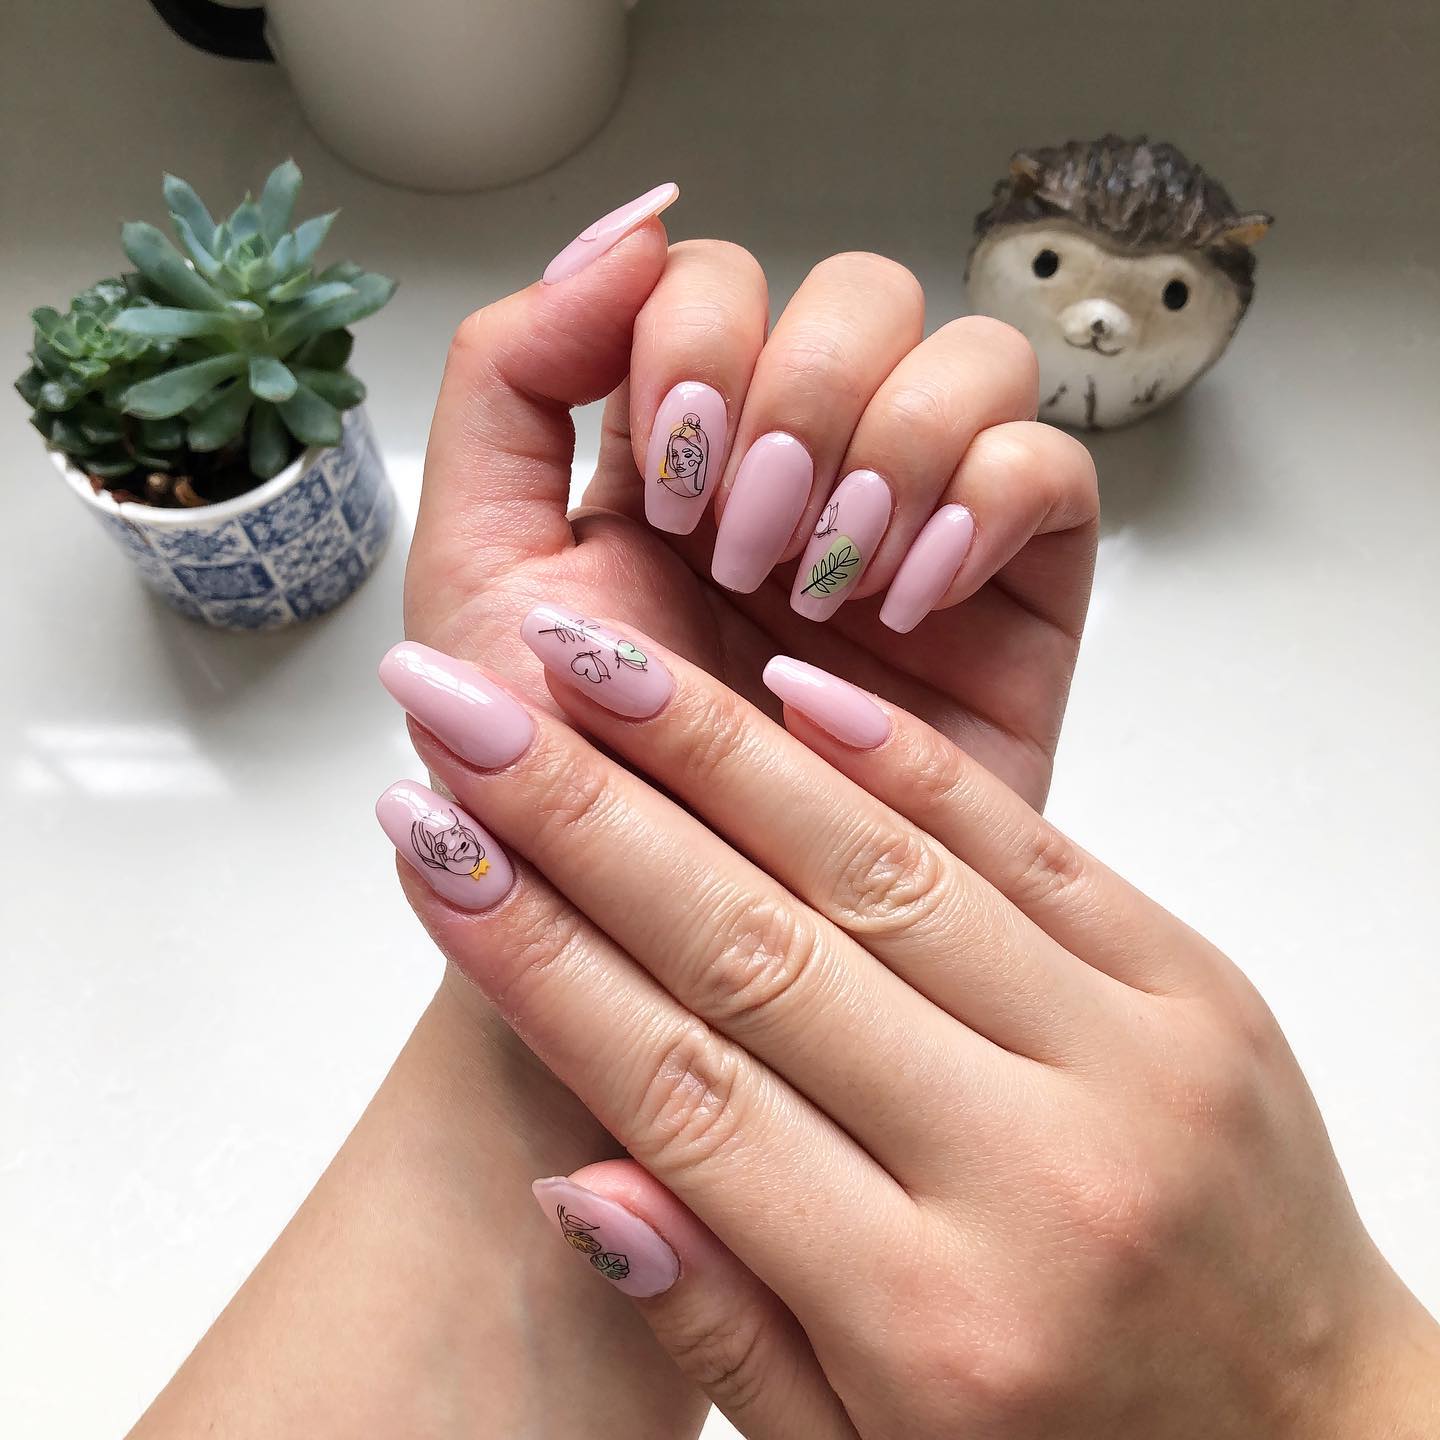 To achieve a simple and chic look, you can use some line art nail stickers on top of your light nude nails. These line art stickers can be woman portraits, leaves or butterflies.